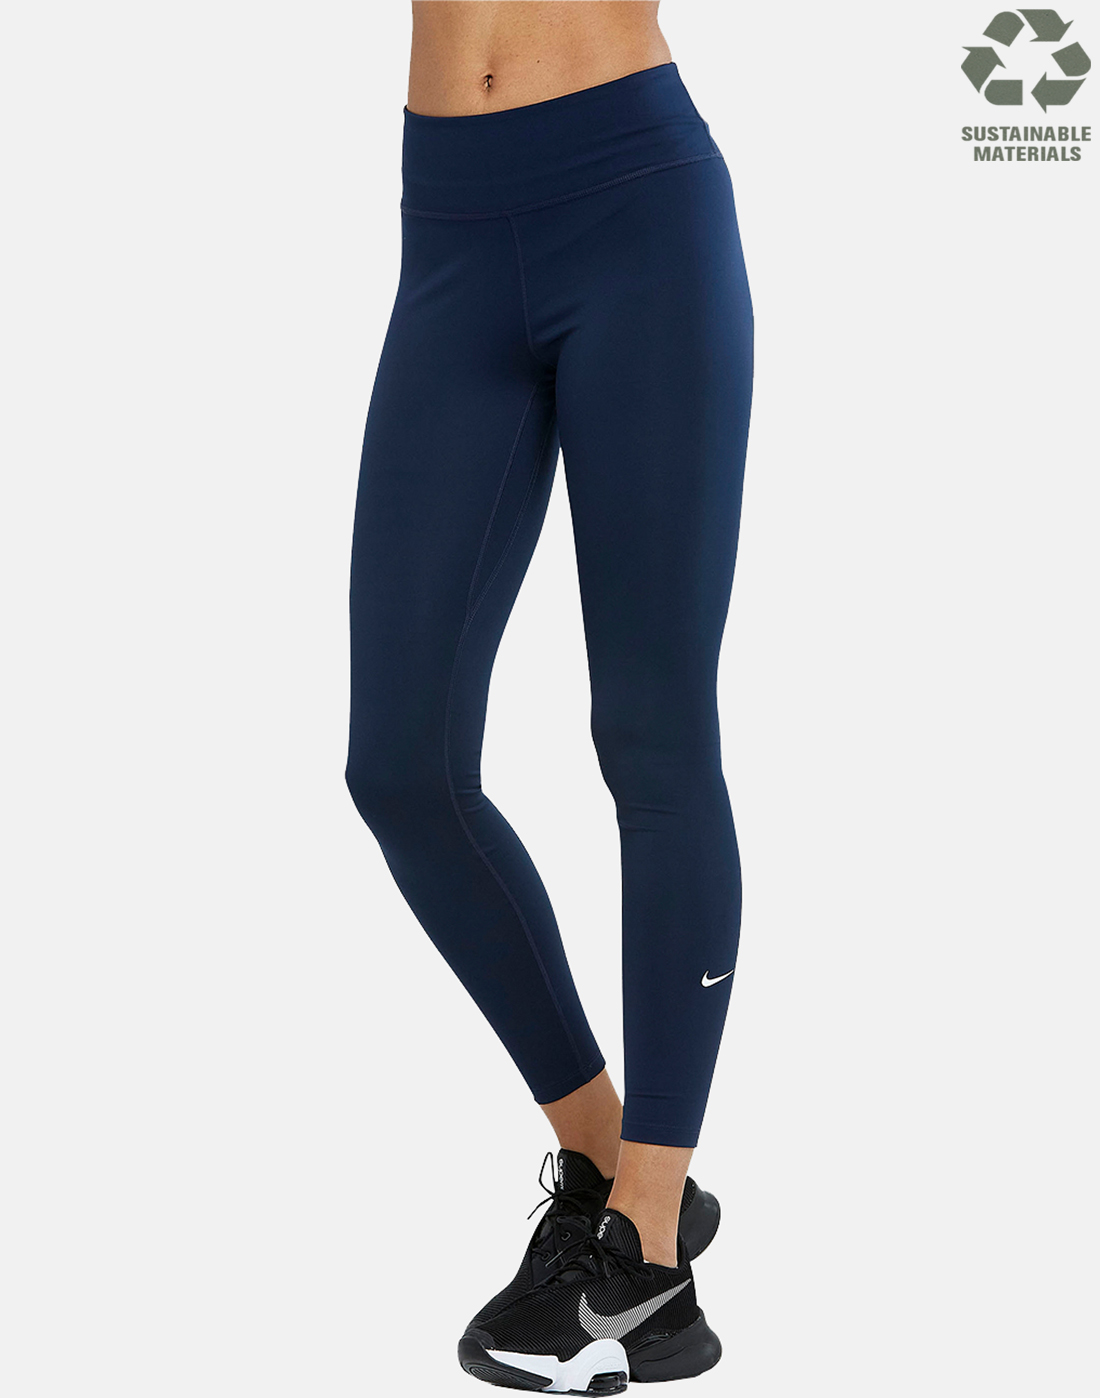 Nike Womens One Leggings - Navy | Life Style Sports IE